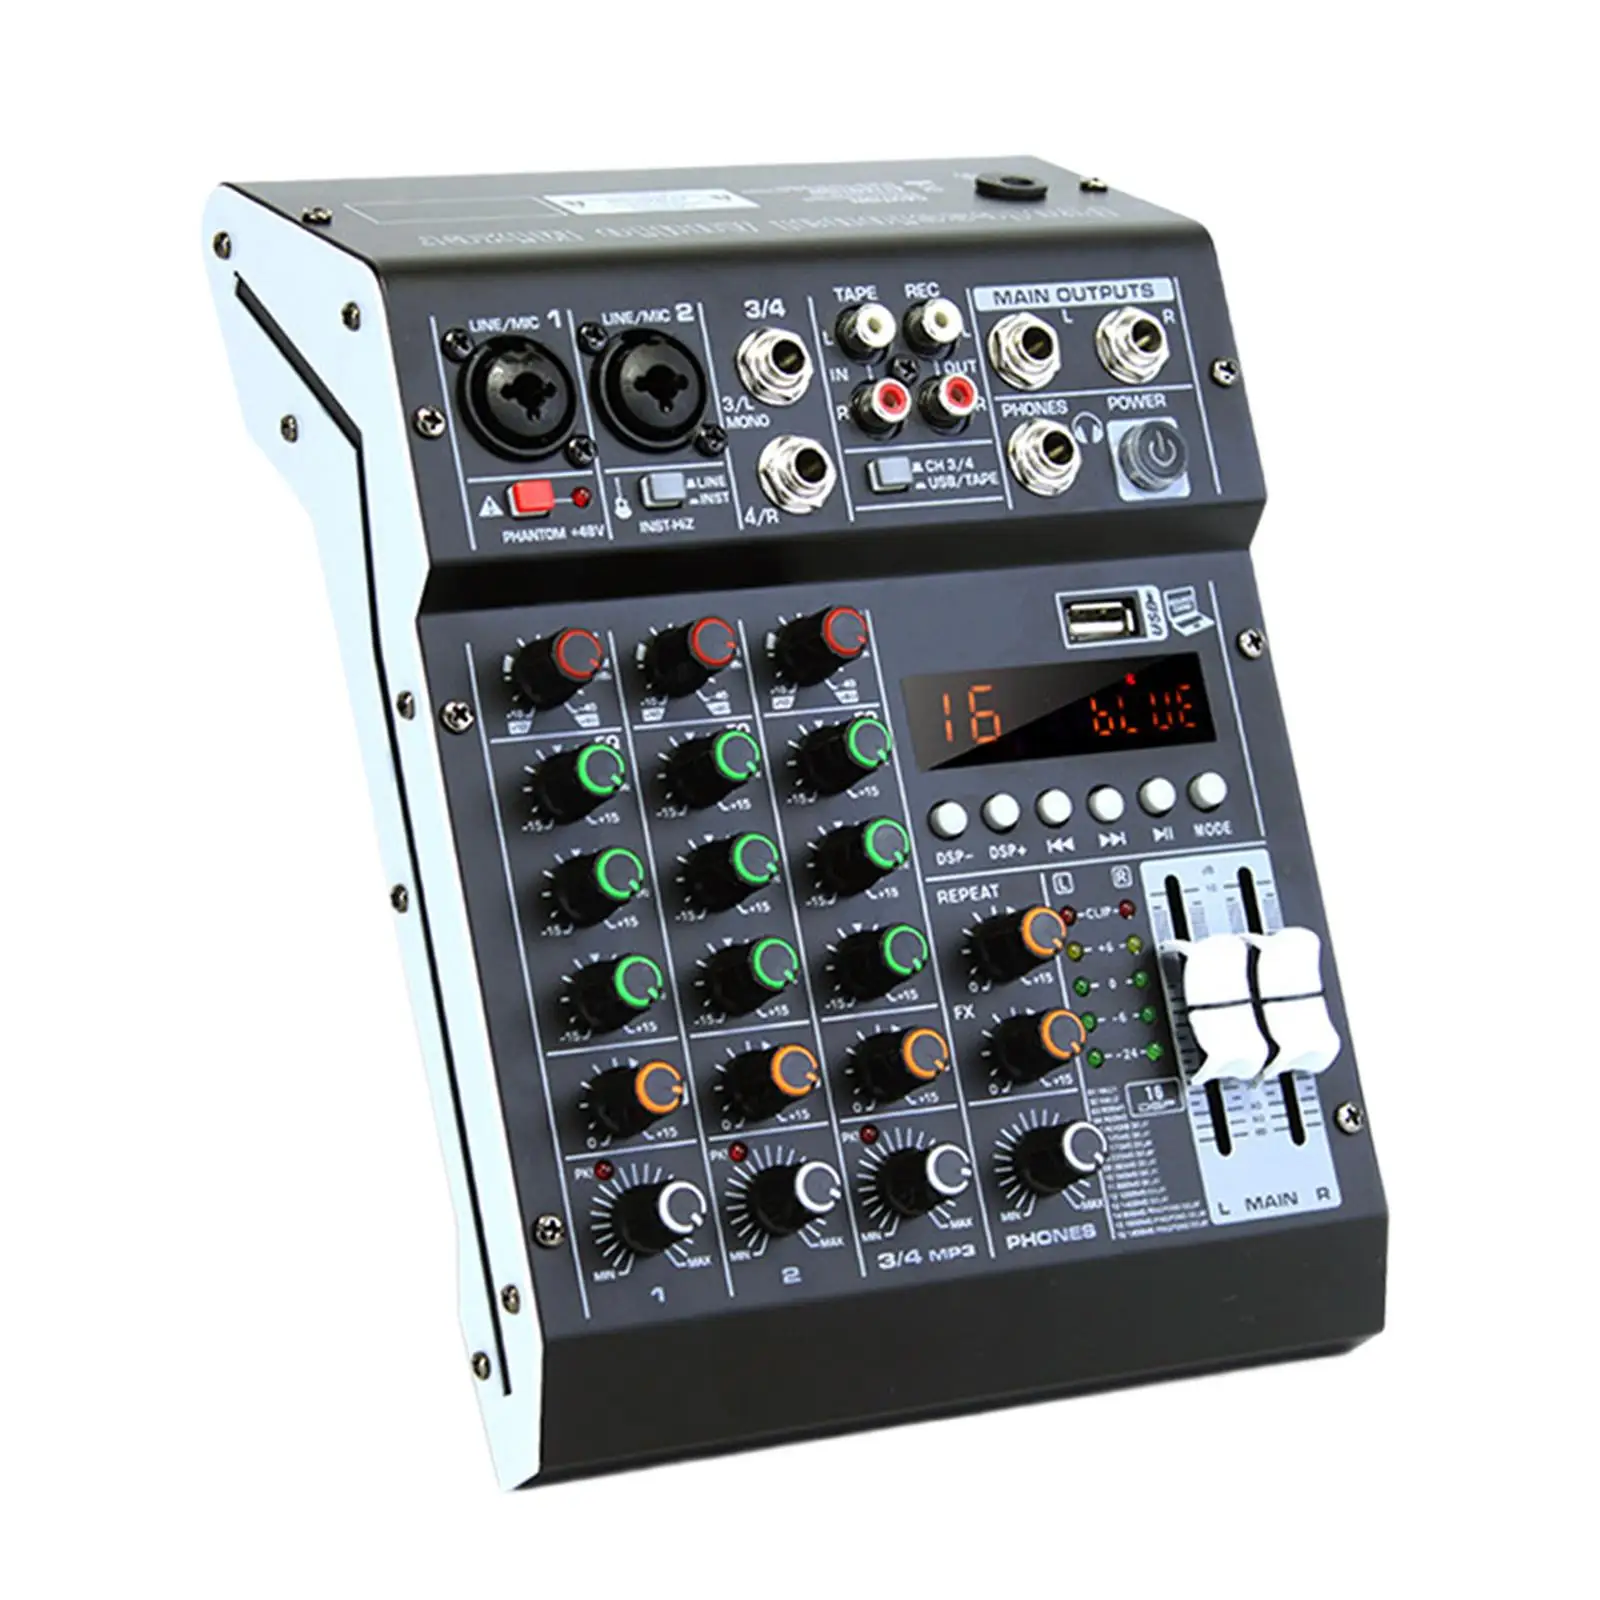 Studio Audio Mixer Build in 16 DSP Effects TP-4M Sound Mixing Console for PC Recording DJ Stage Family KTV Campus Speech Meeting